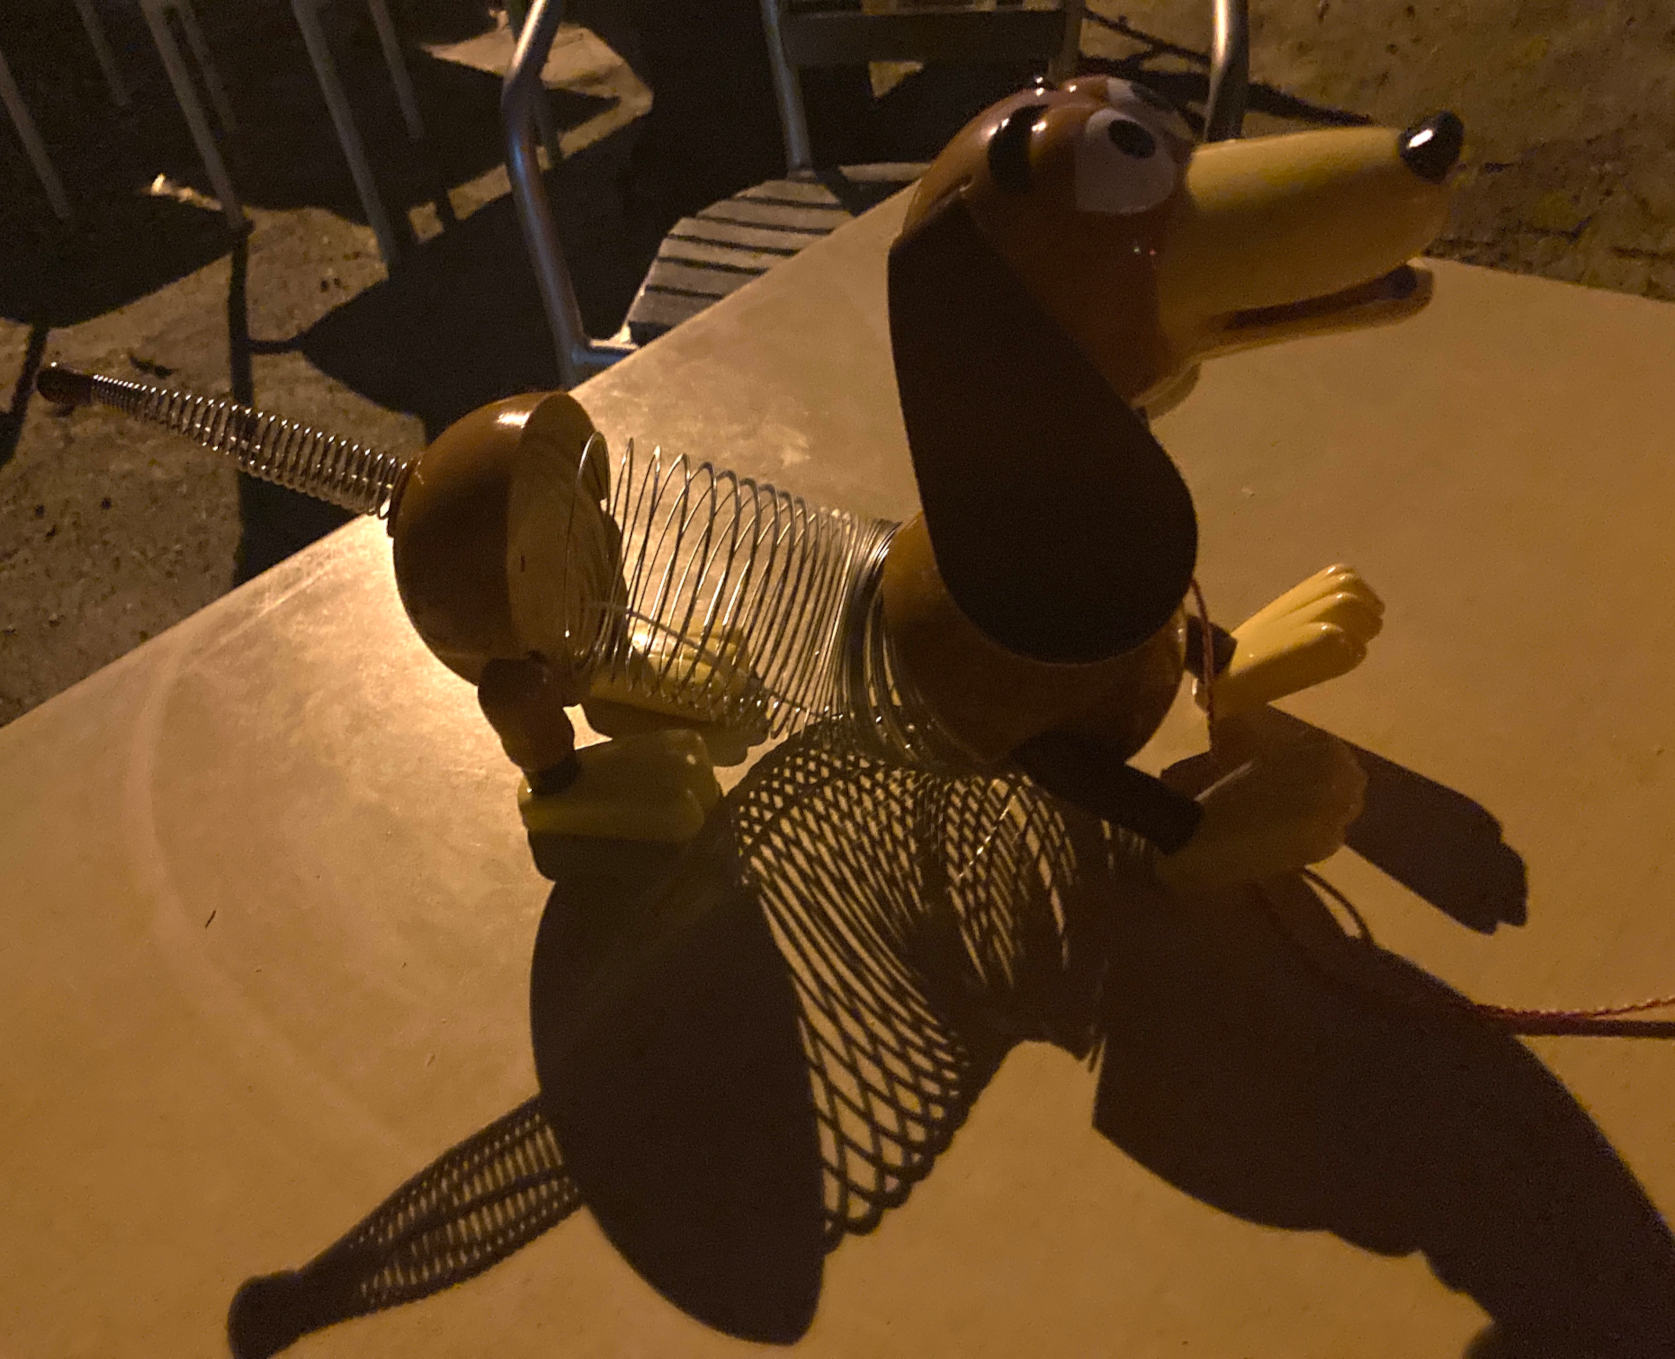 Slinky Dog stretching on table with accompanying shadow effect.